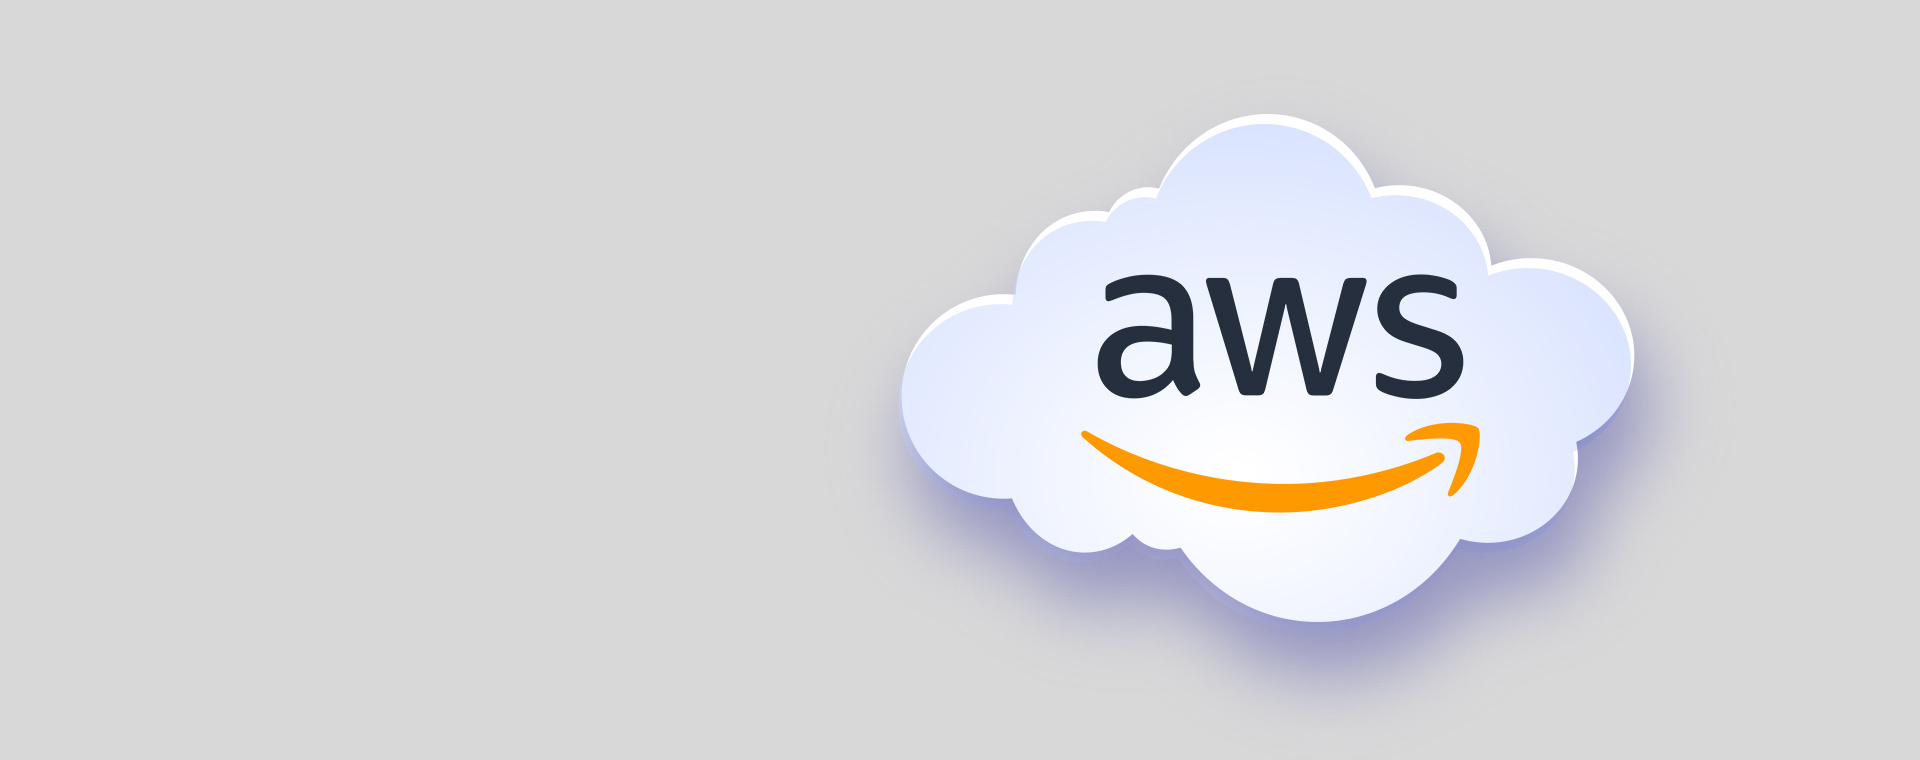 Experience seamless server management with AWS services combined with the added benefits of CloudLab services for optimal performance and efficiency